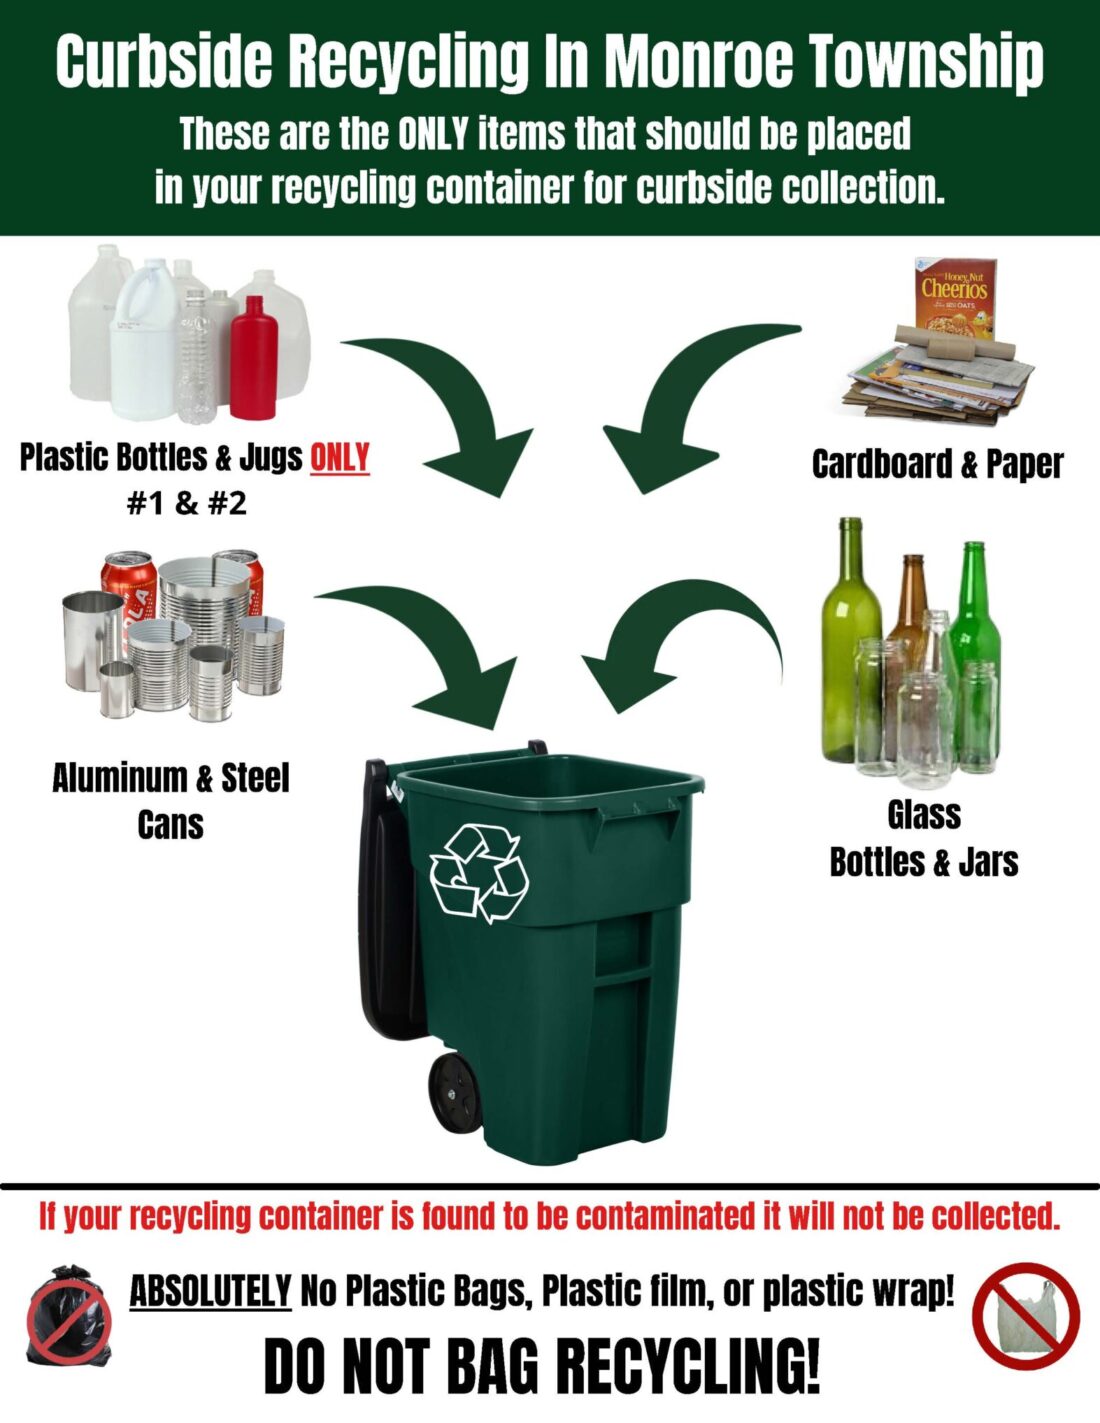 https://monroetownshipnj.org/3-2/public-works/recycling-101/these-items-do-not-belong-in-your-curbside-recycling-container-8_page_2/